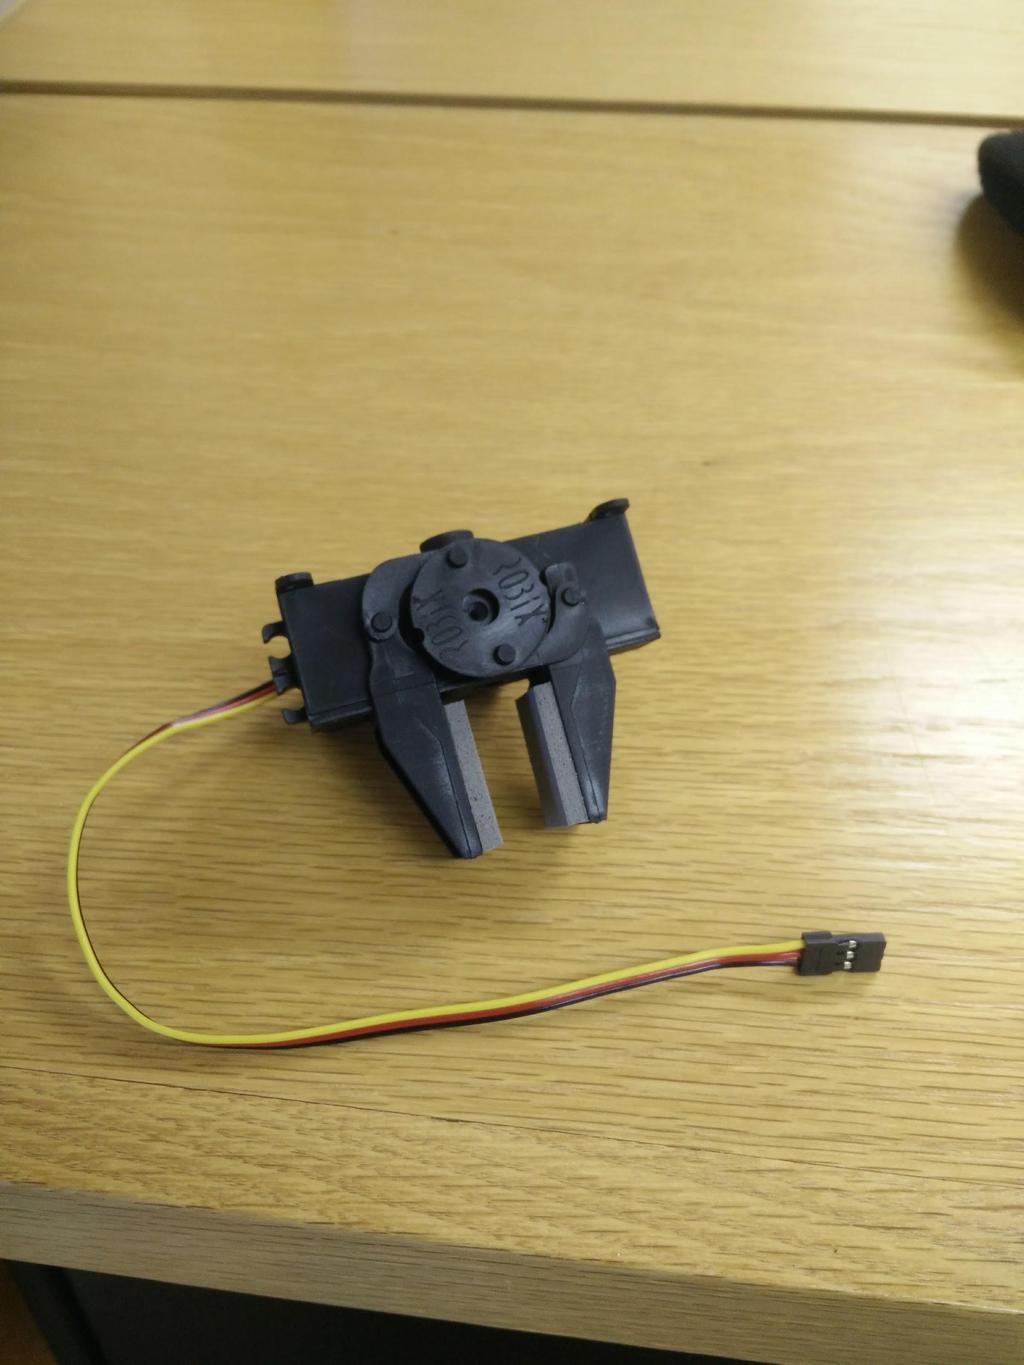 Task 3 - Lock Rotation Gripper Arm Purchased a gripper arm and servo motor to